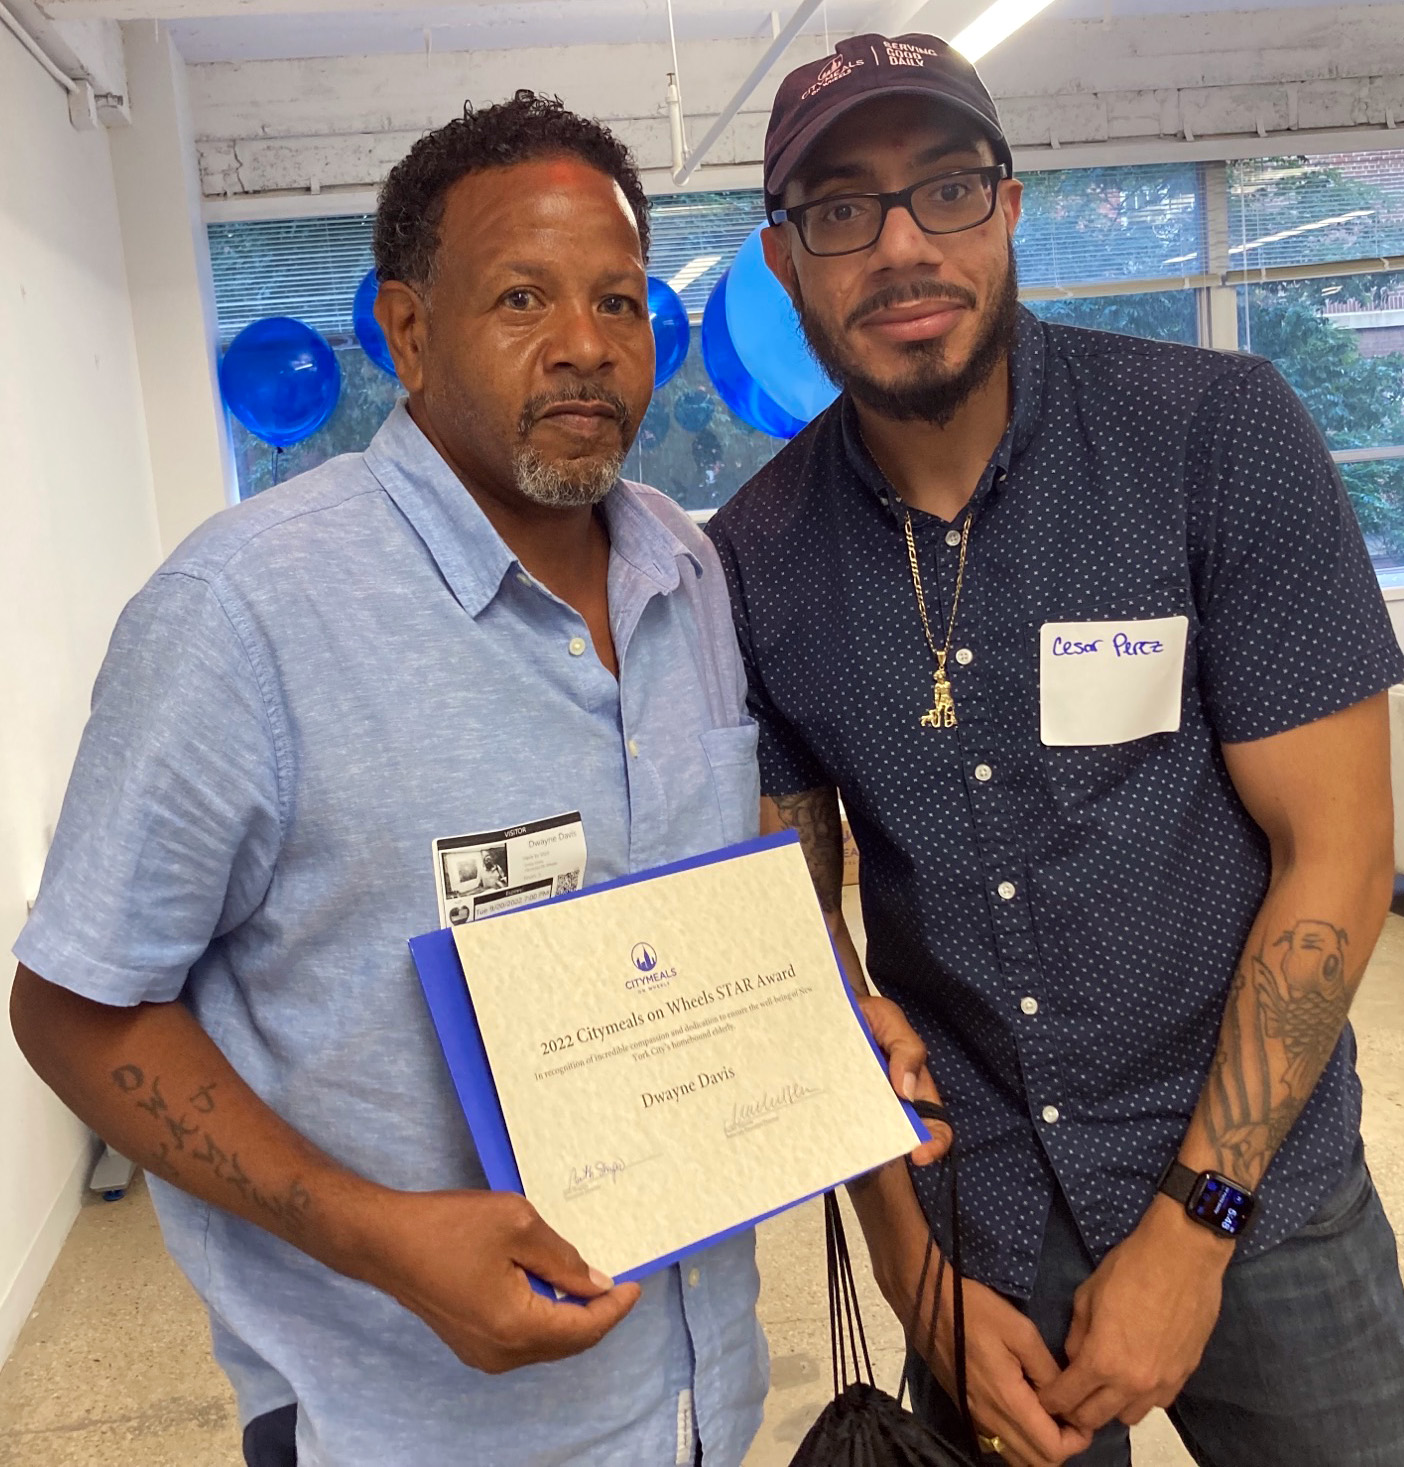 Dwayne, a middle-aged African-American man, poses with his award with Citymeals staff member.